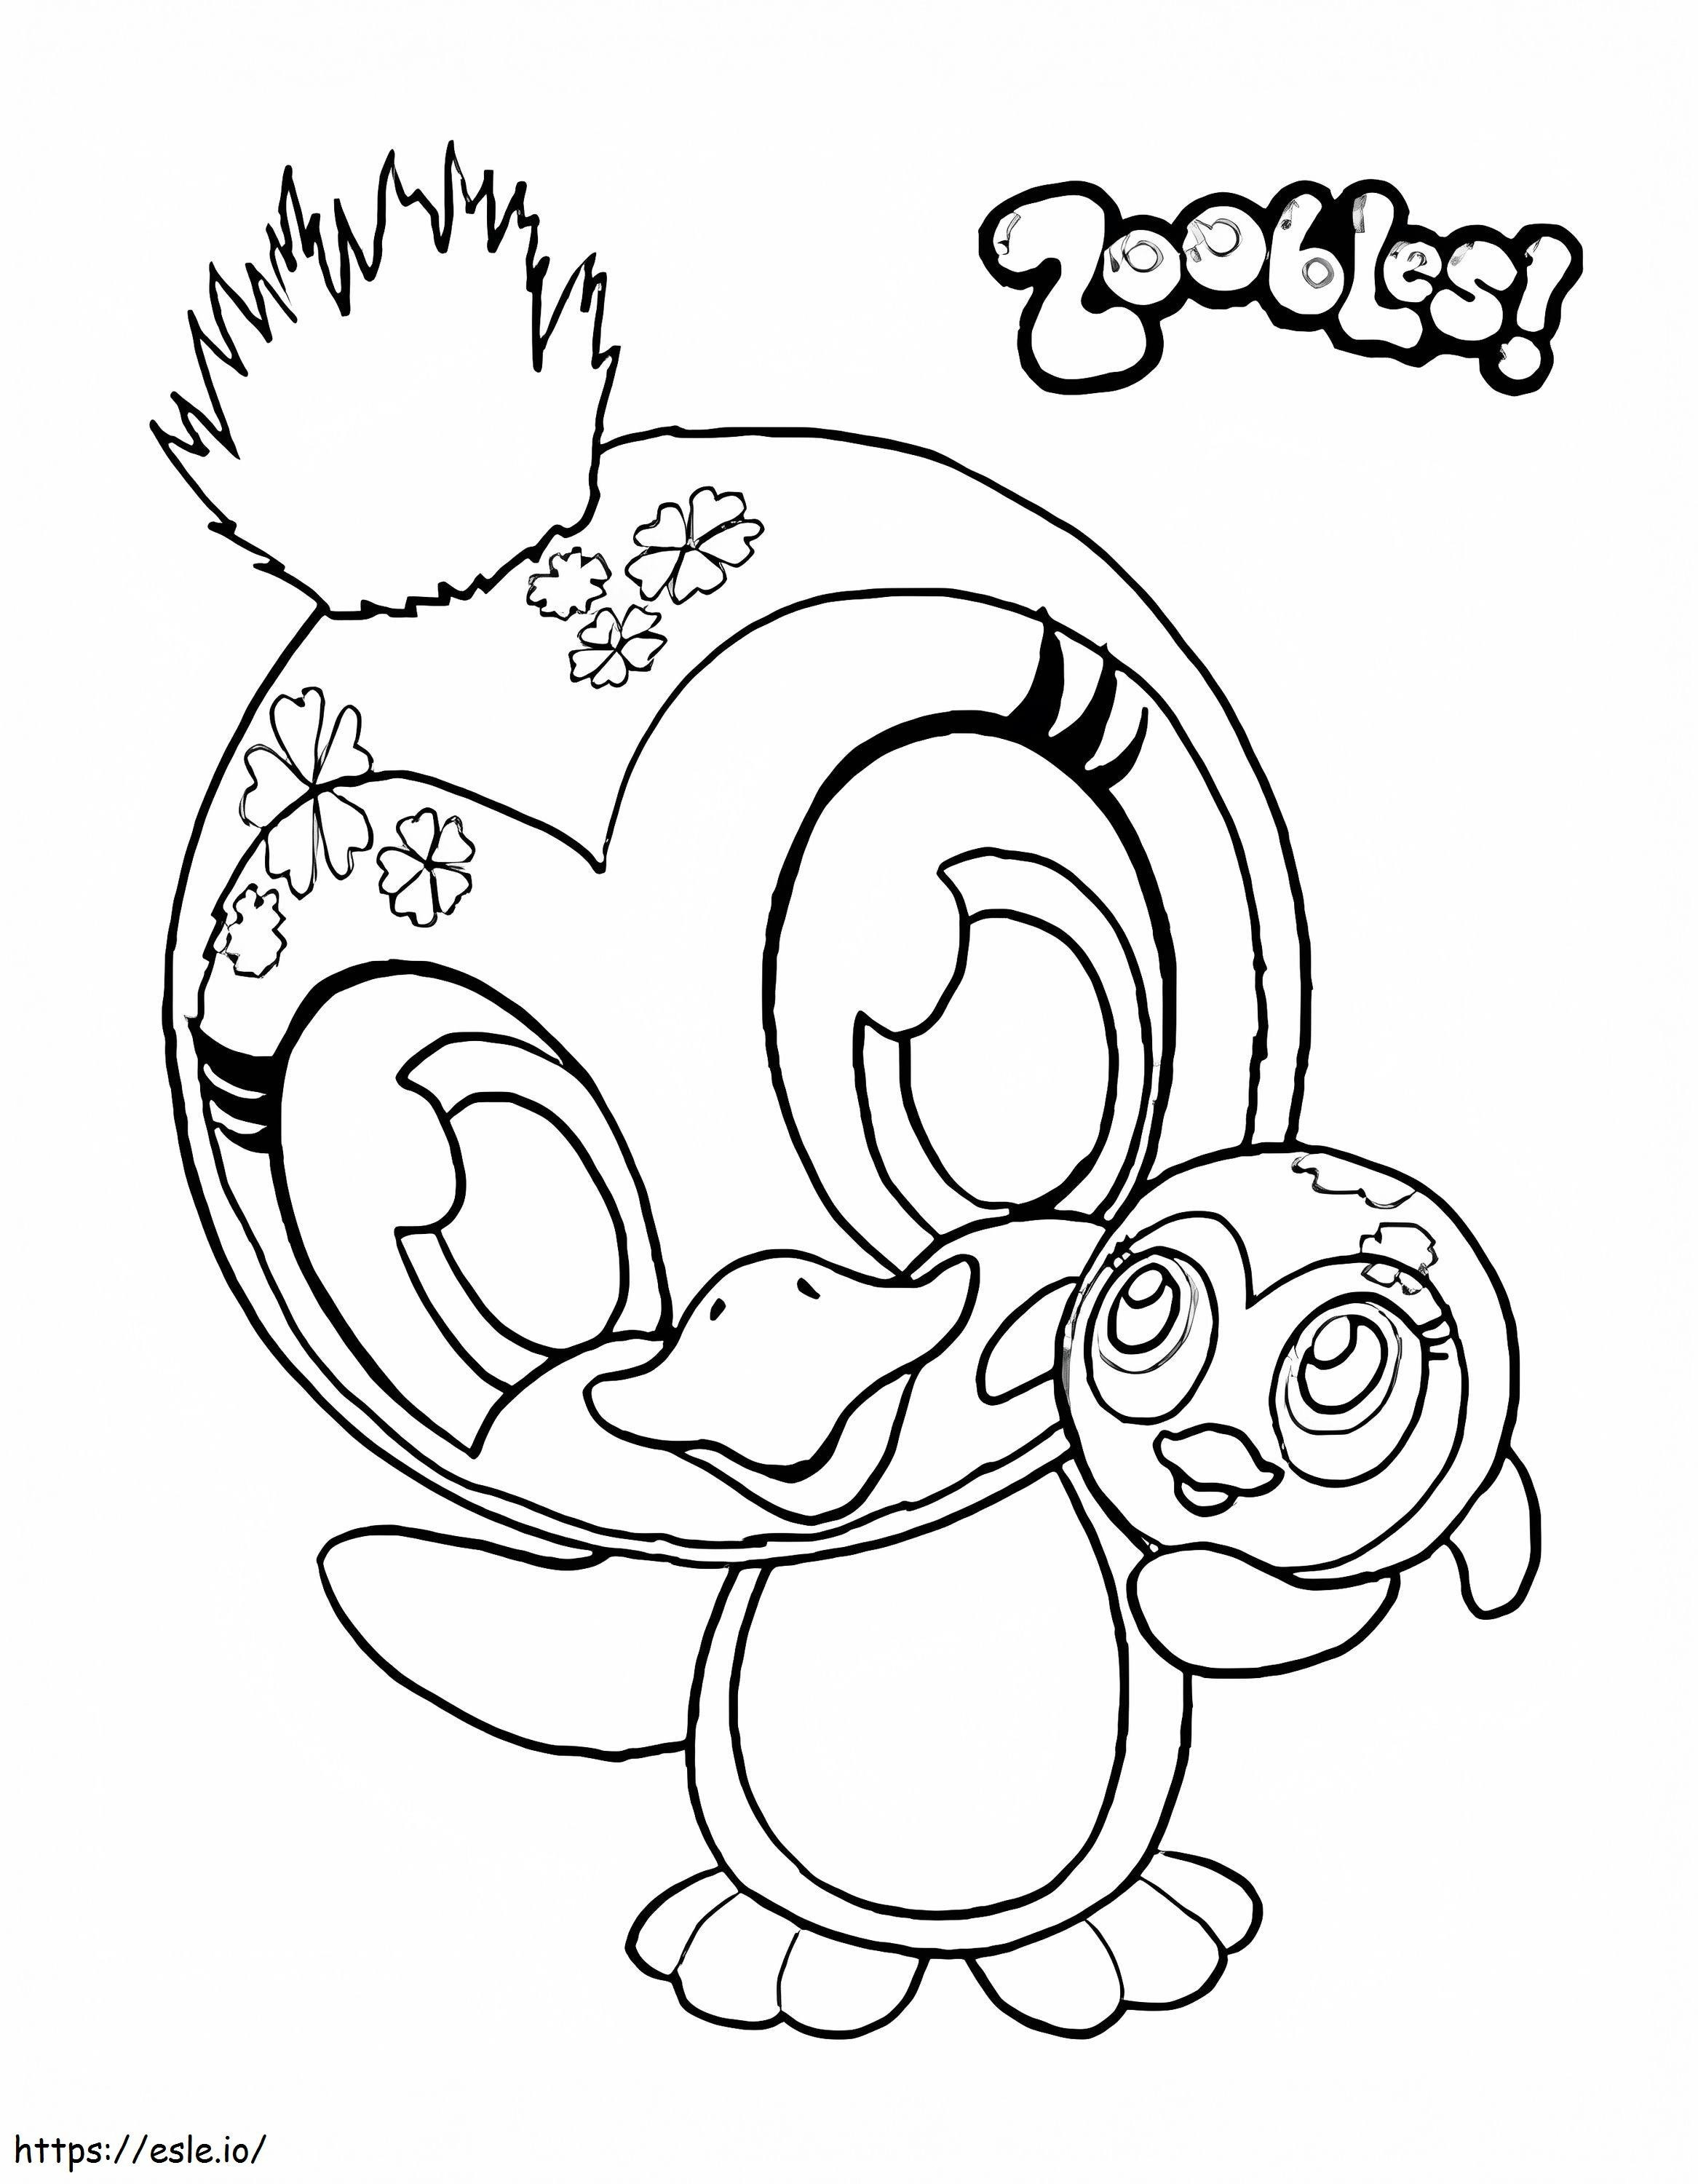 Zoobles Penguin coloring page